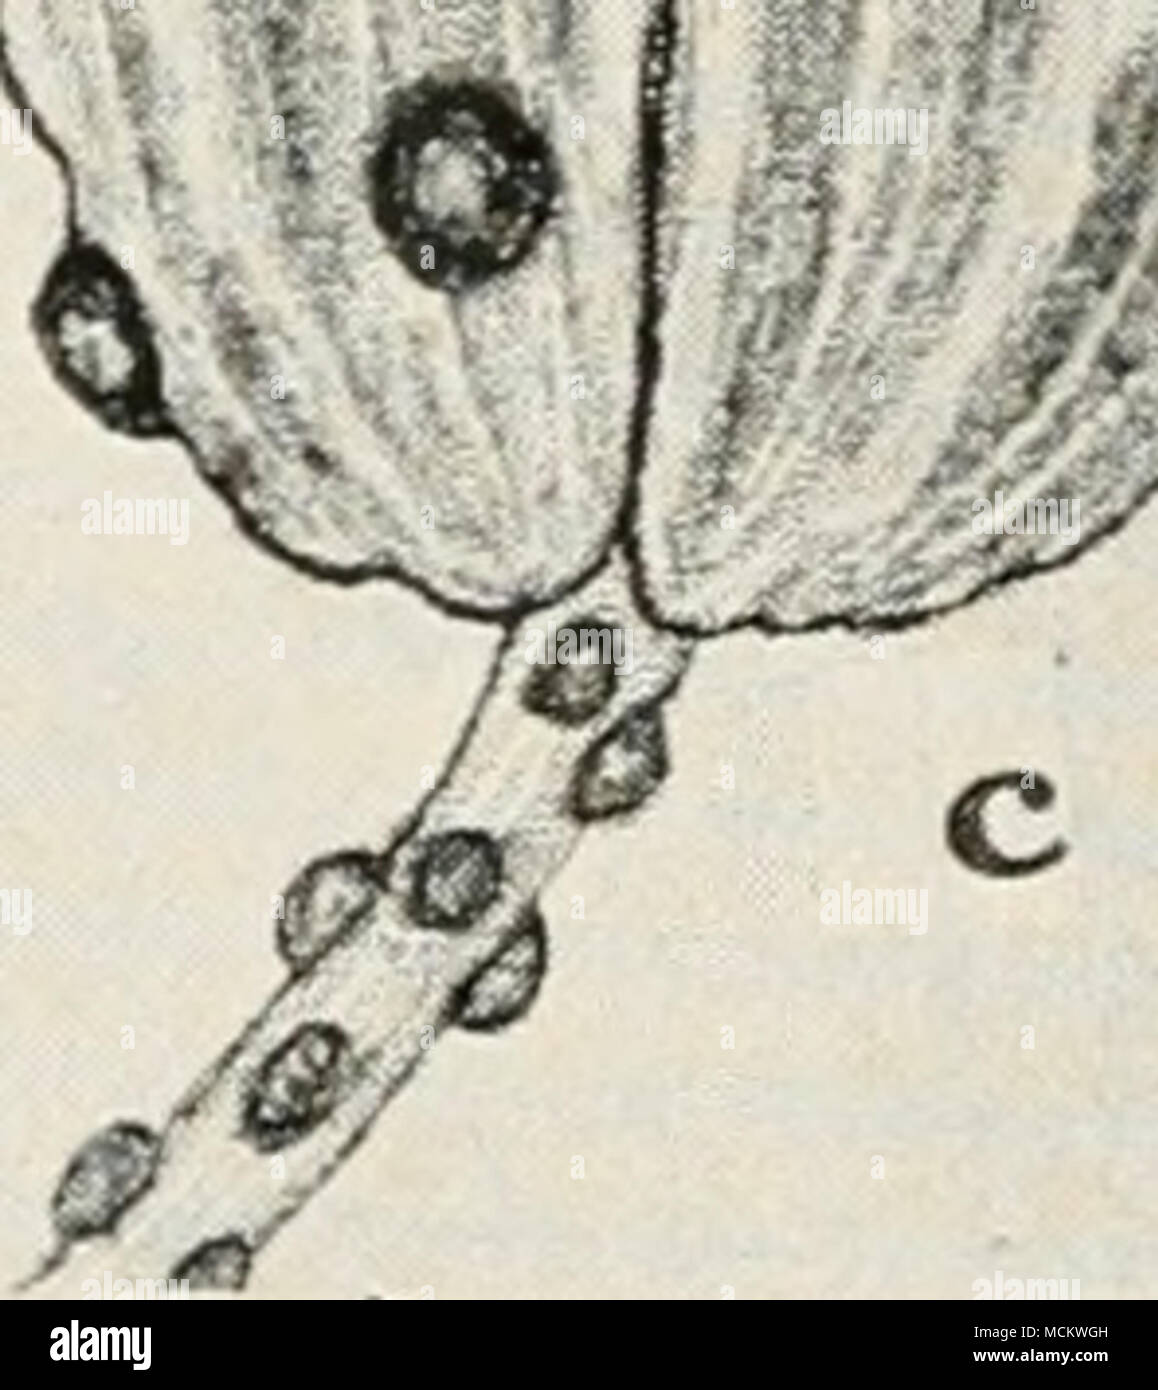 . Fig. 69. Celery Diseases. a. Septoria leaf spot on leaf, b. Septoria leaf spot on leaflet, c. Septoria lesions on celery seed, d. Septoria spots showing pycnidial bodies, e. cross section showing pyncidium and pycnospores of Septoria pelroselini (a, c, and e after Coons and Levin). Stock Photo